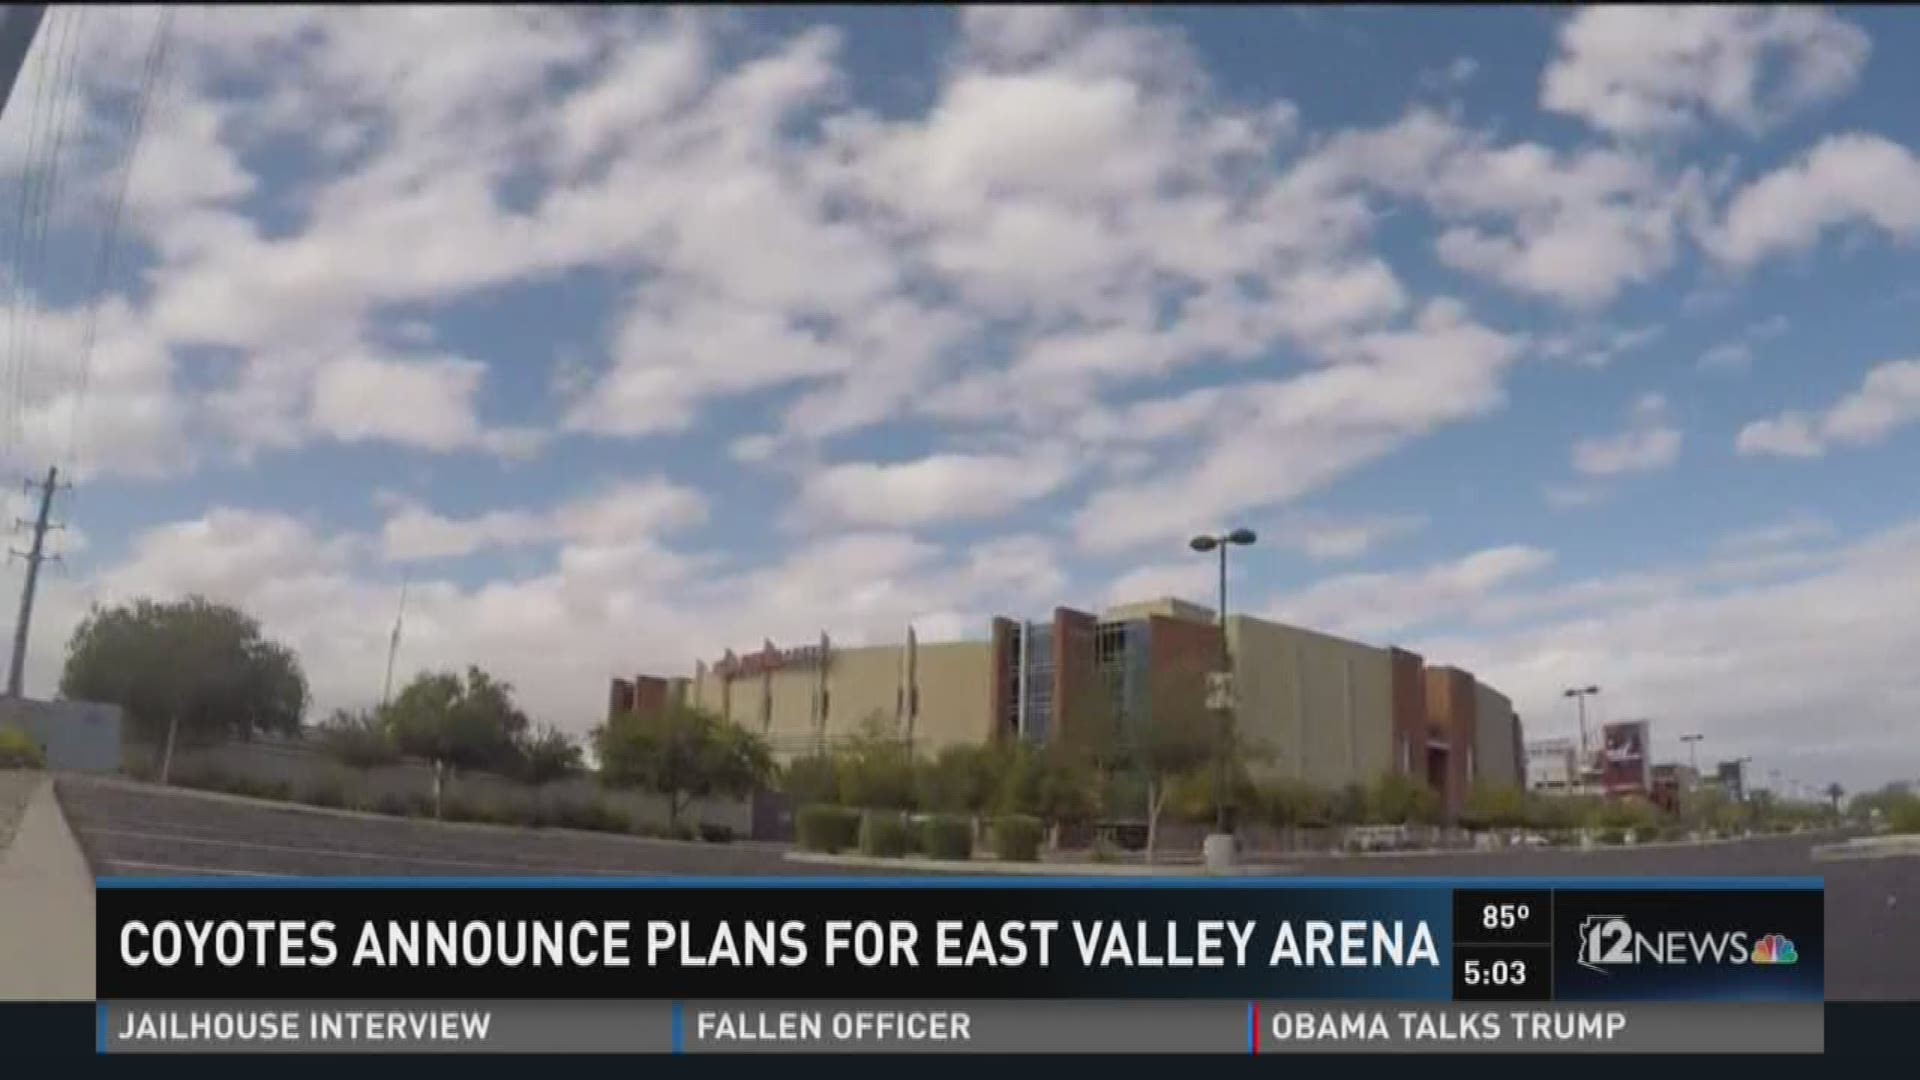 If all goes well, Coyotes could move to east valley in three years.